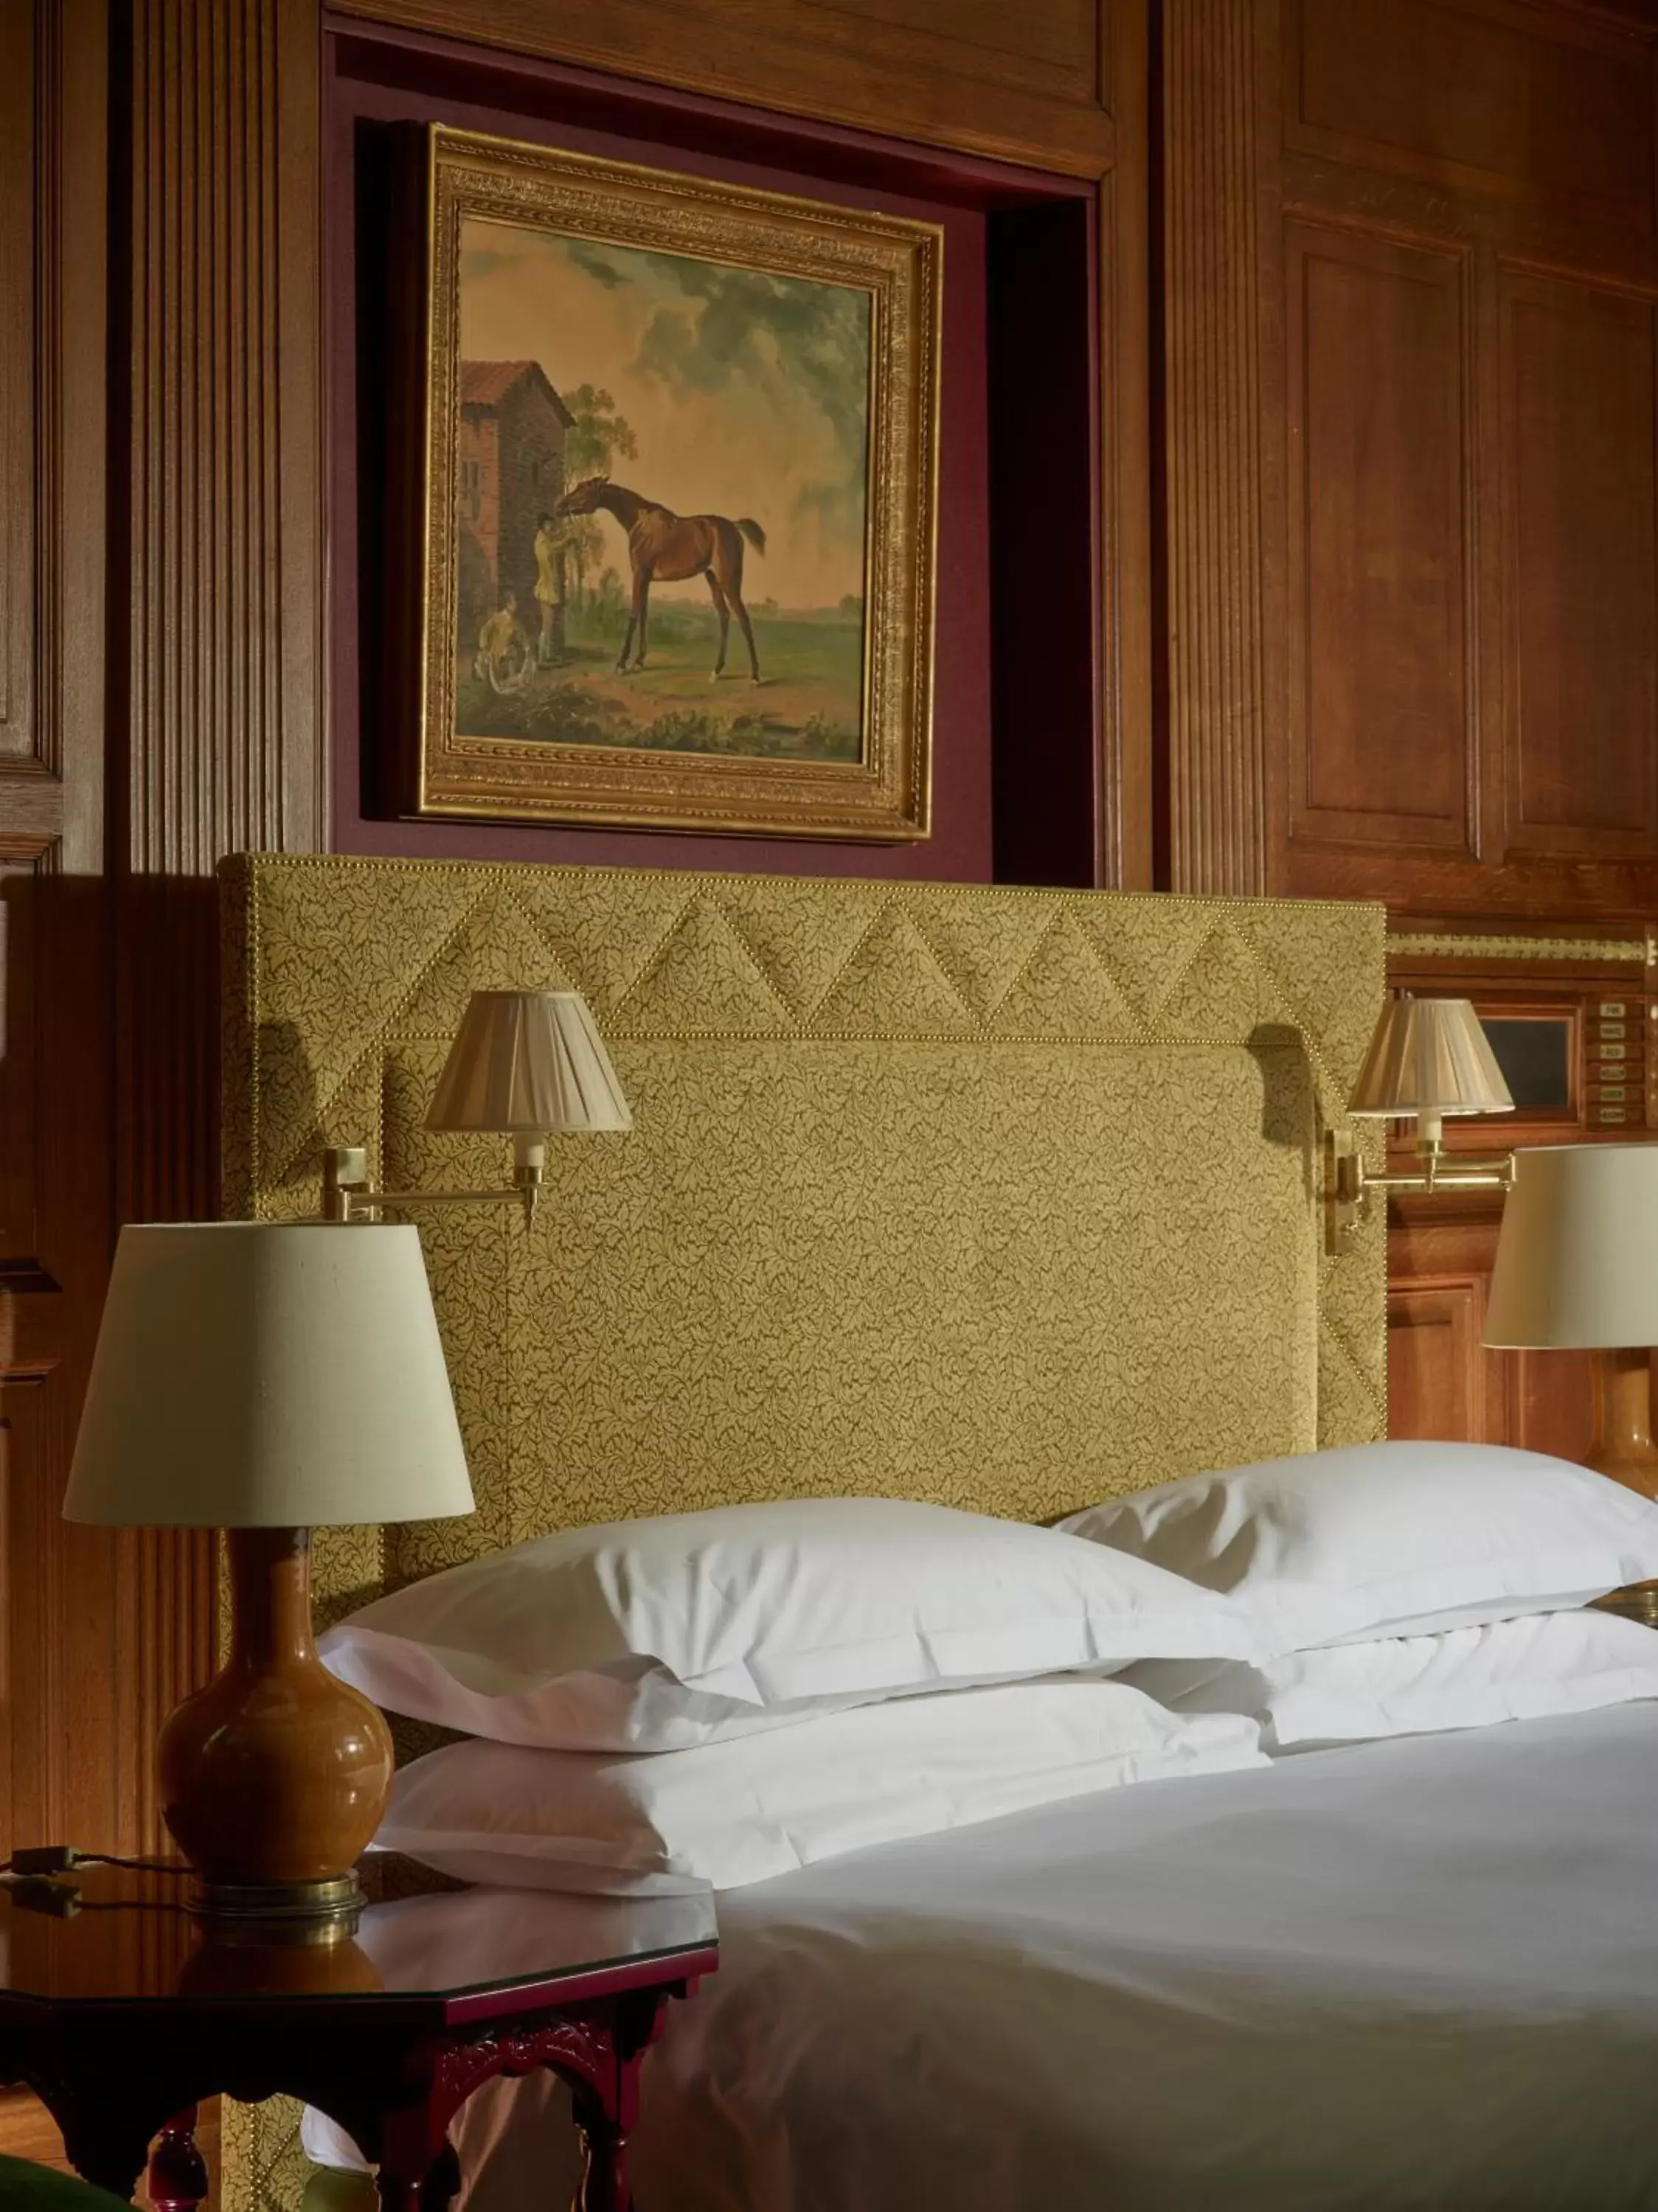 Decorative detail, Bed in Cliveden House - an Iconic Luxury Hotel